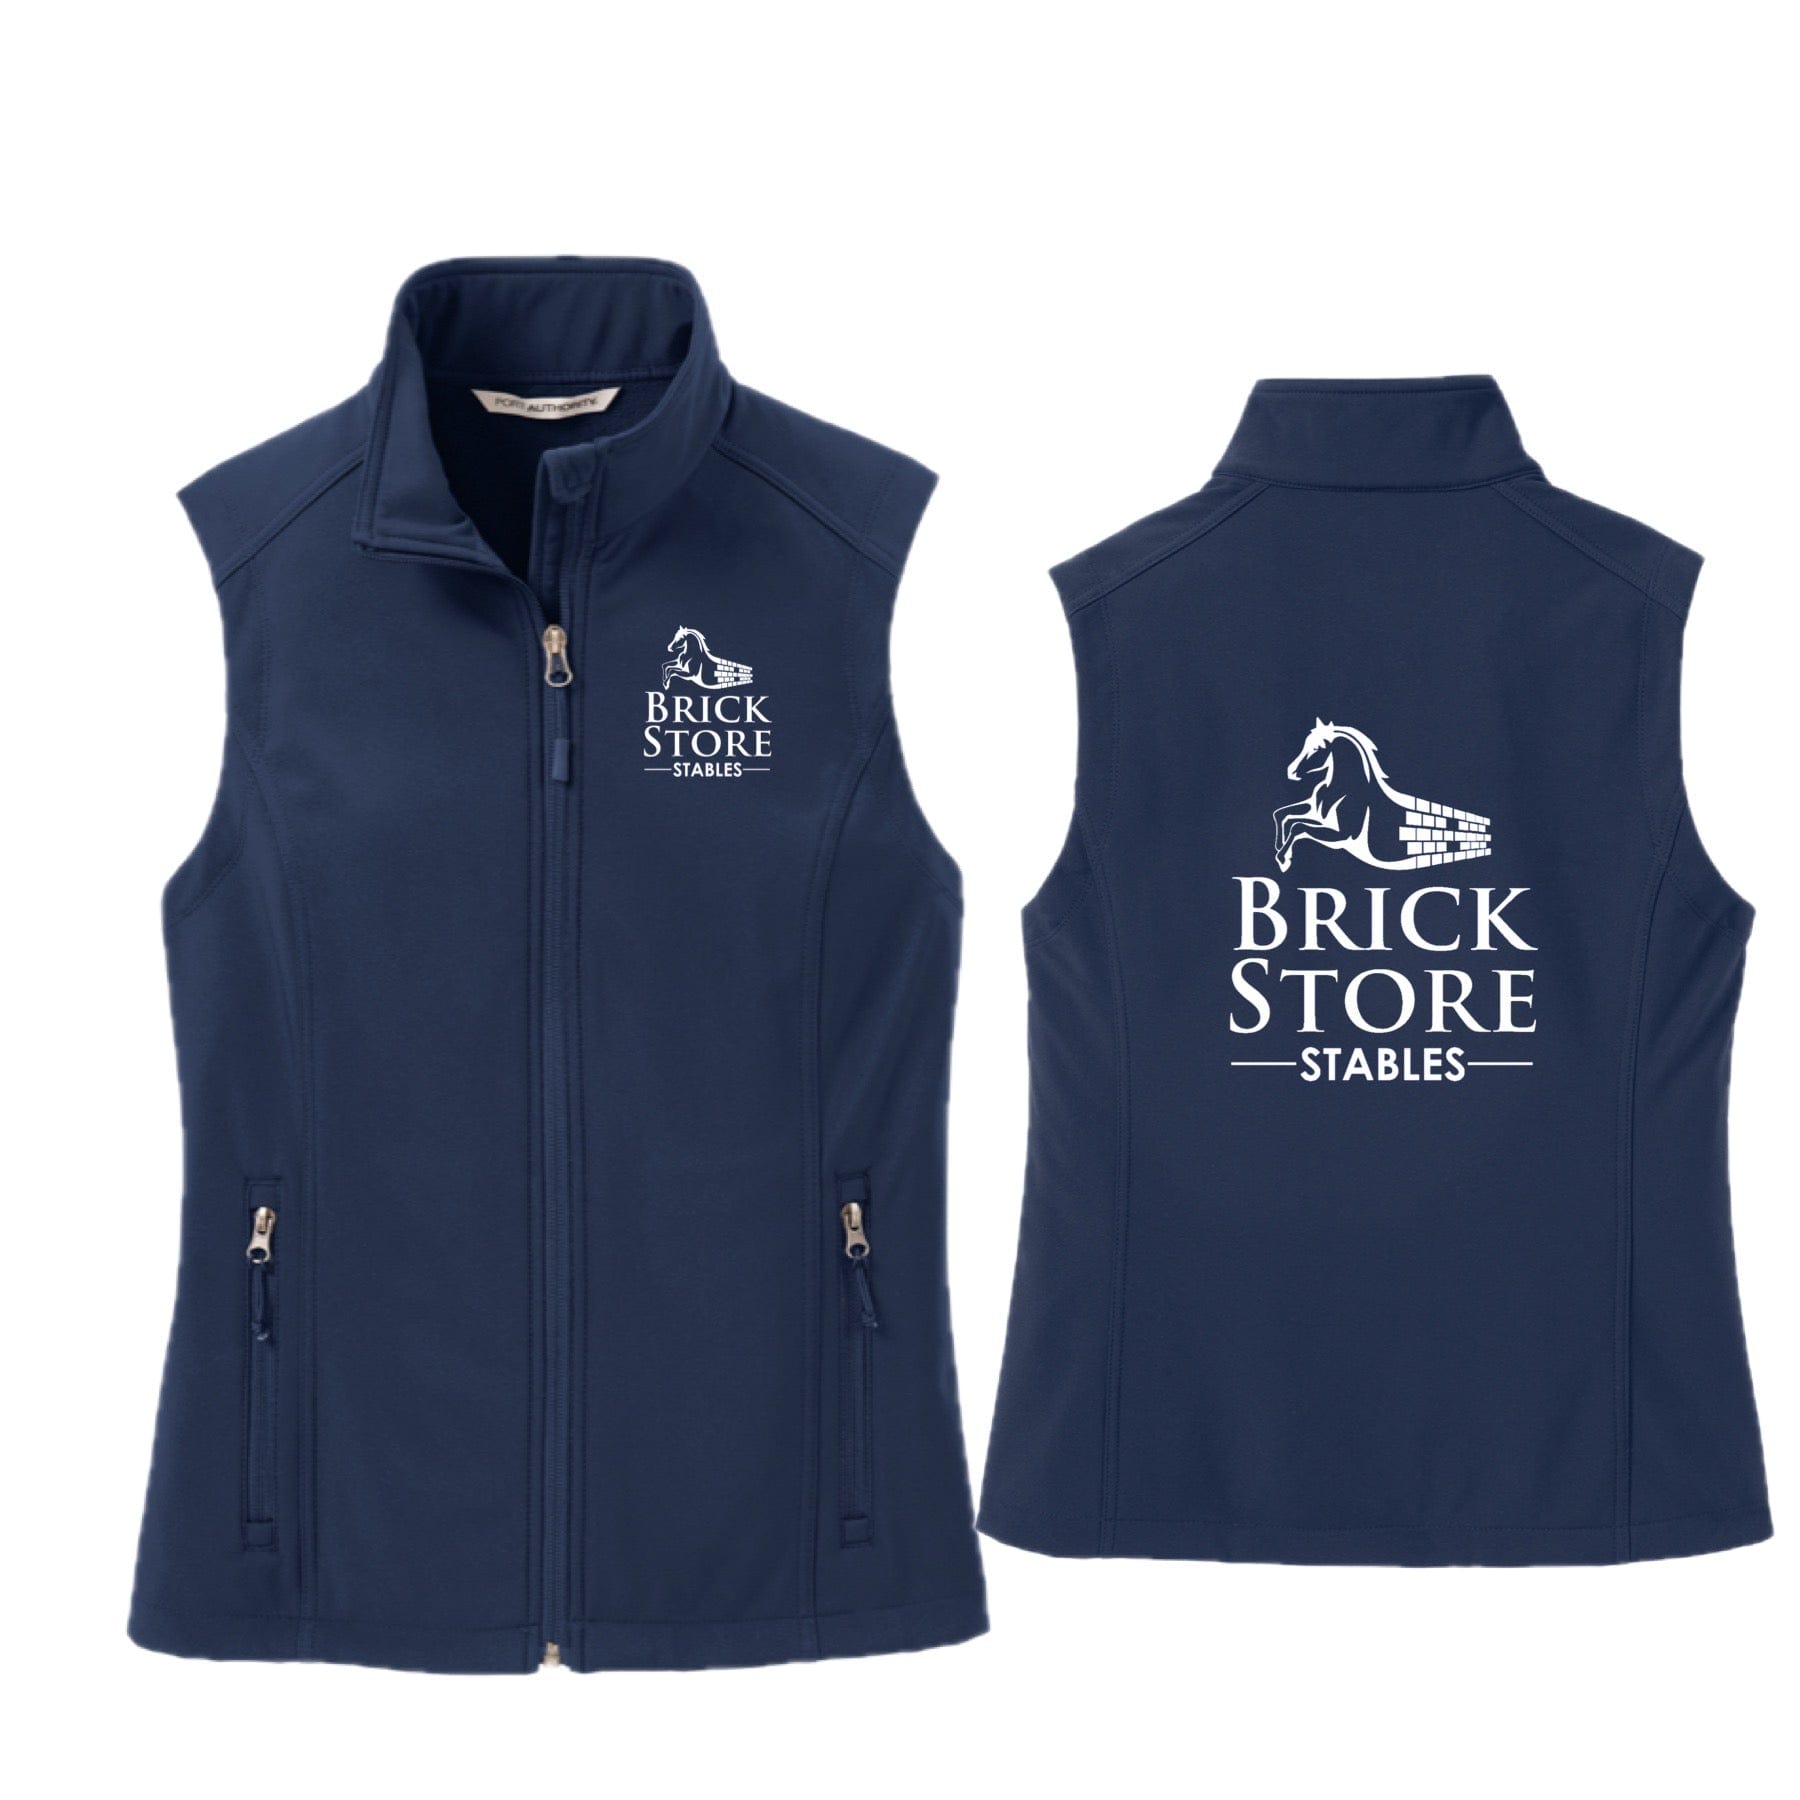 Equestrian Team Apparel Brick Store Stables Adult Shell Vest equestrian team apparel online tack store mobile tack store custom farm apparel custom show stable clothing equestrian lifestyle horse show clothing riding clothes horses equestrian tack store